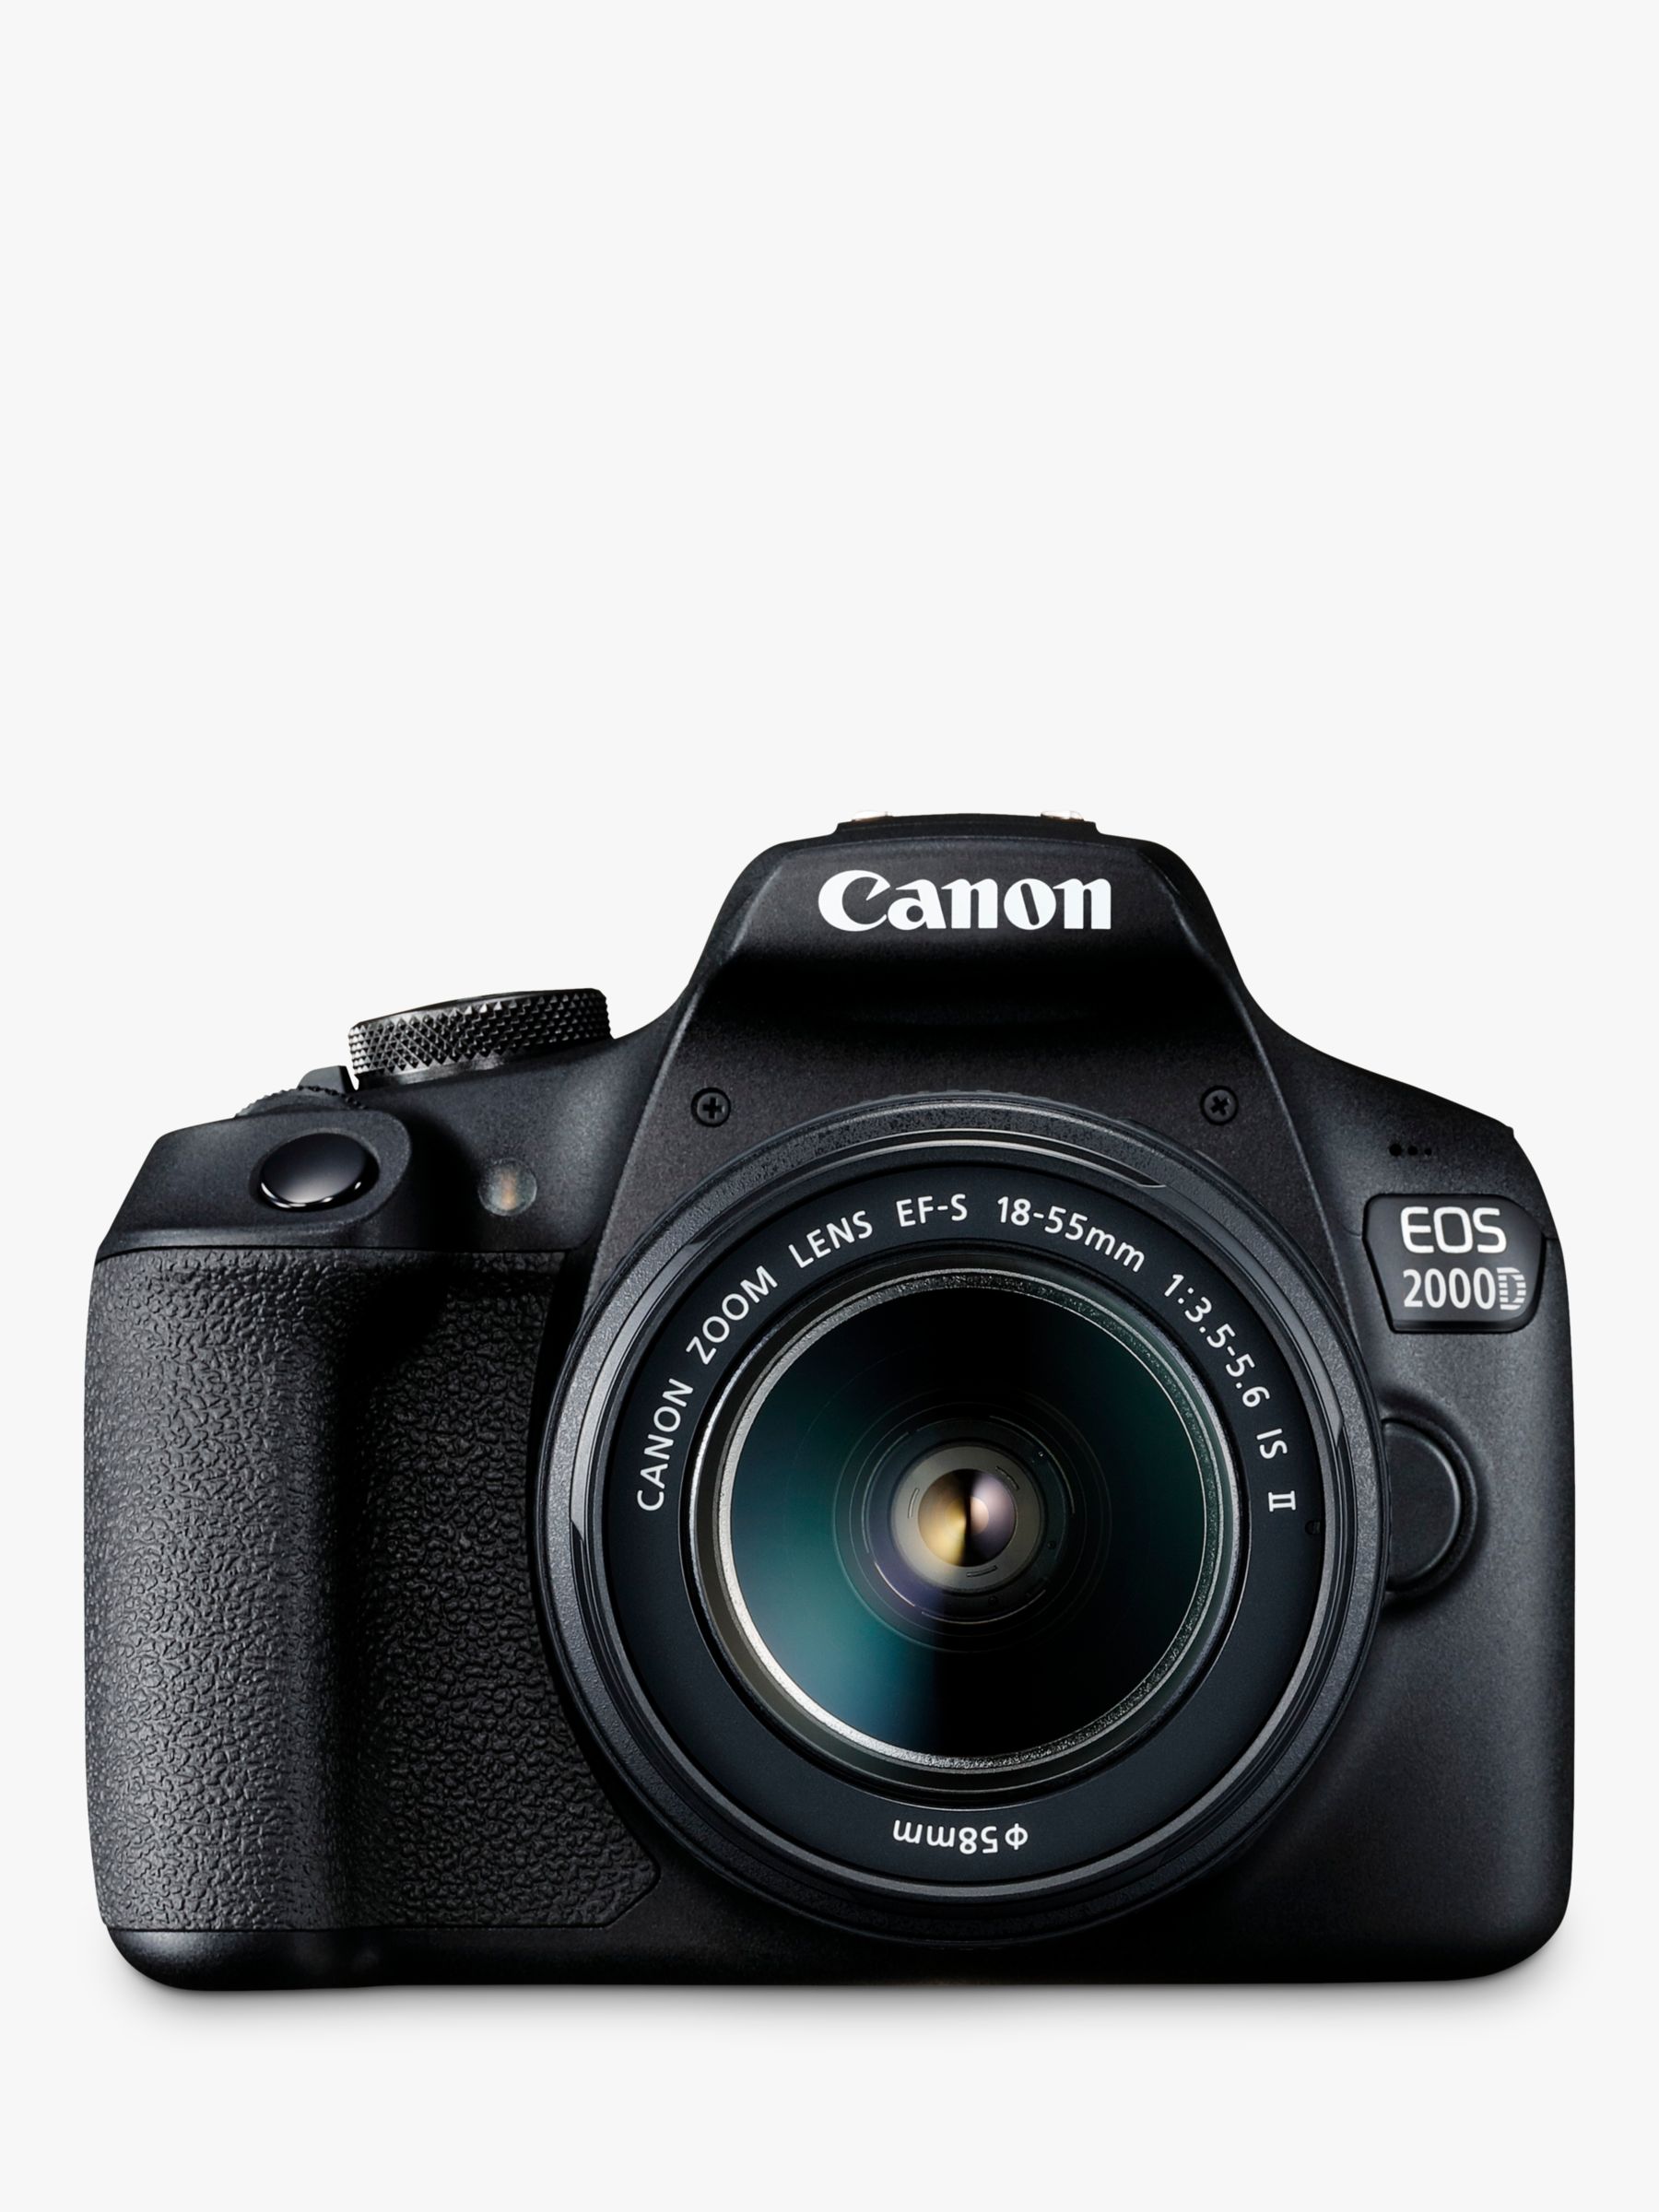 Image of Canon EOS 2000D Digital SLR Camera with 1855mm IS II Lens 1080p Full HD 241MP WiFi NFC Optical Viewfinder 3 LCD Screen Black